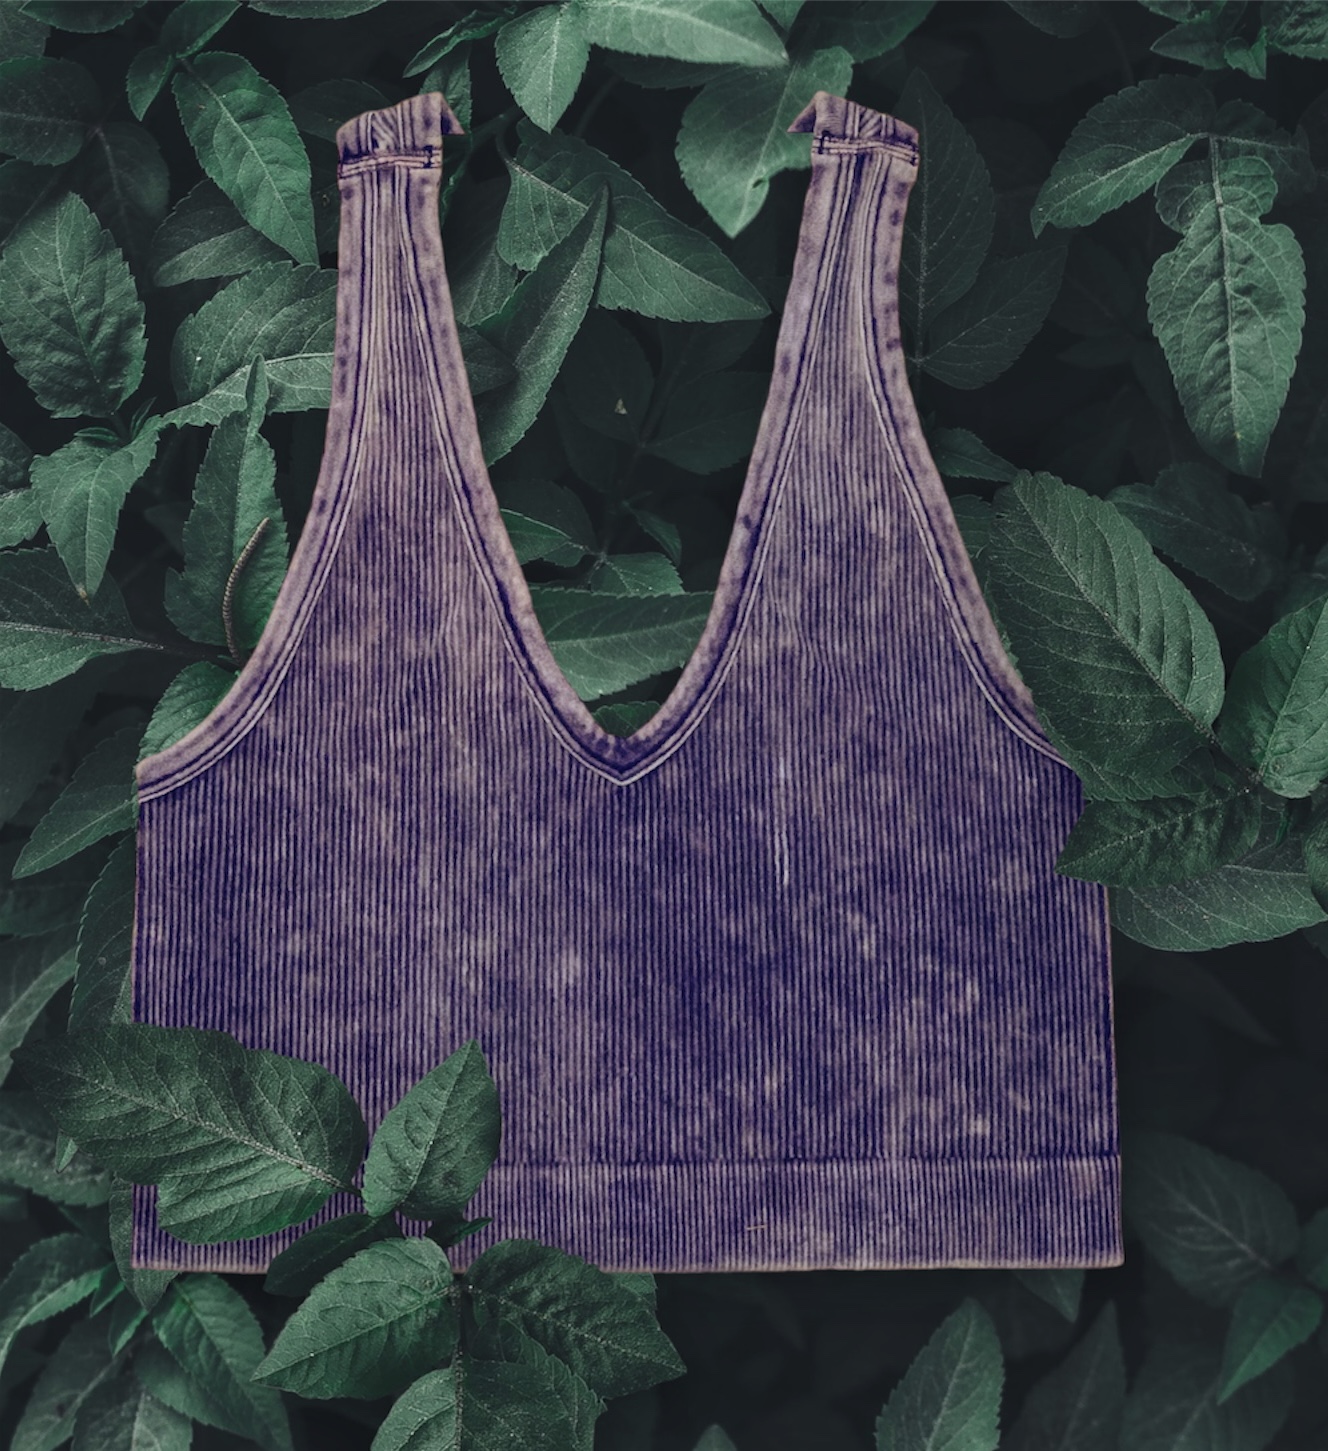 Our bralettes are light and breathable with a perfect washed color! These take layering to the next level, instantly making any outfit look well thought out!